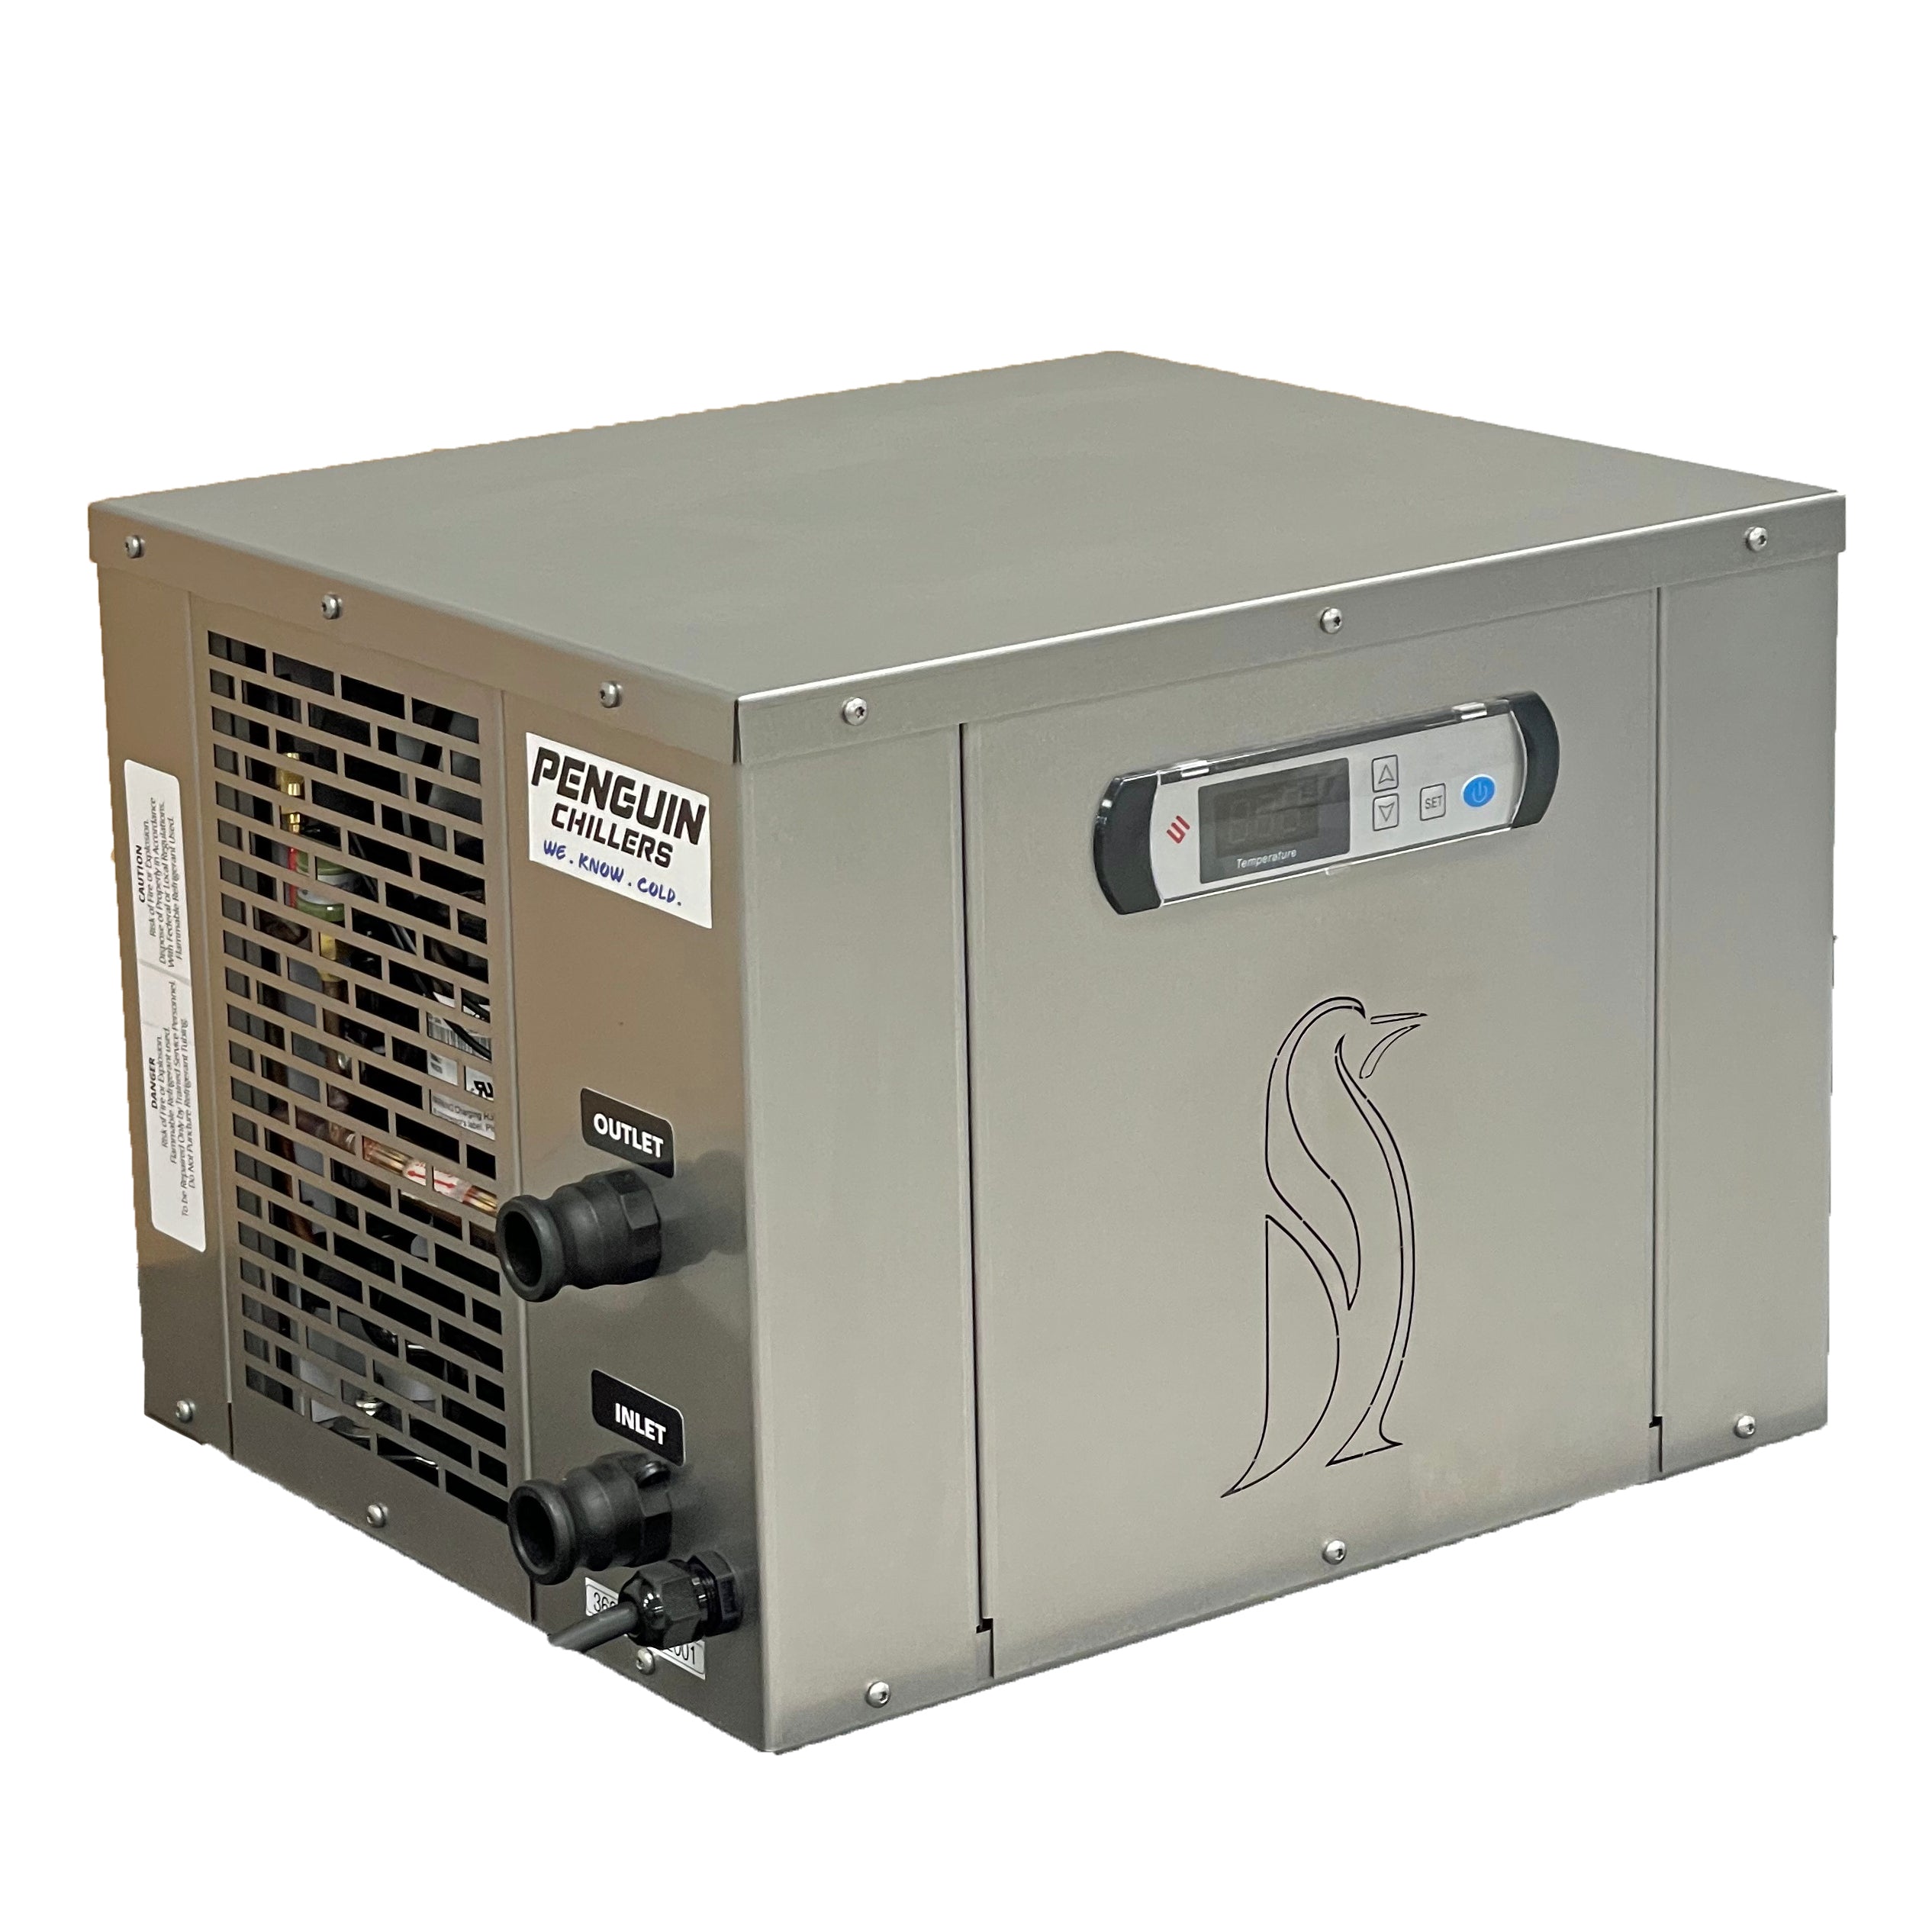 Penguin Chillers chiller side view